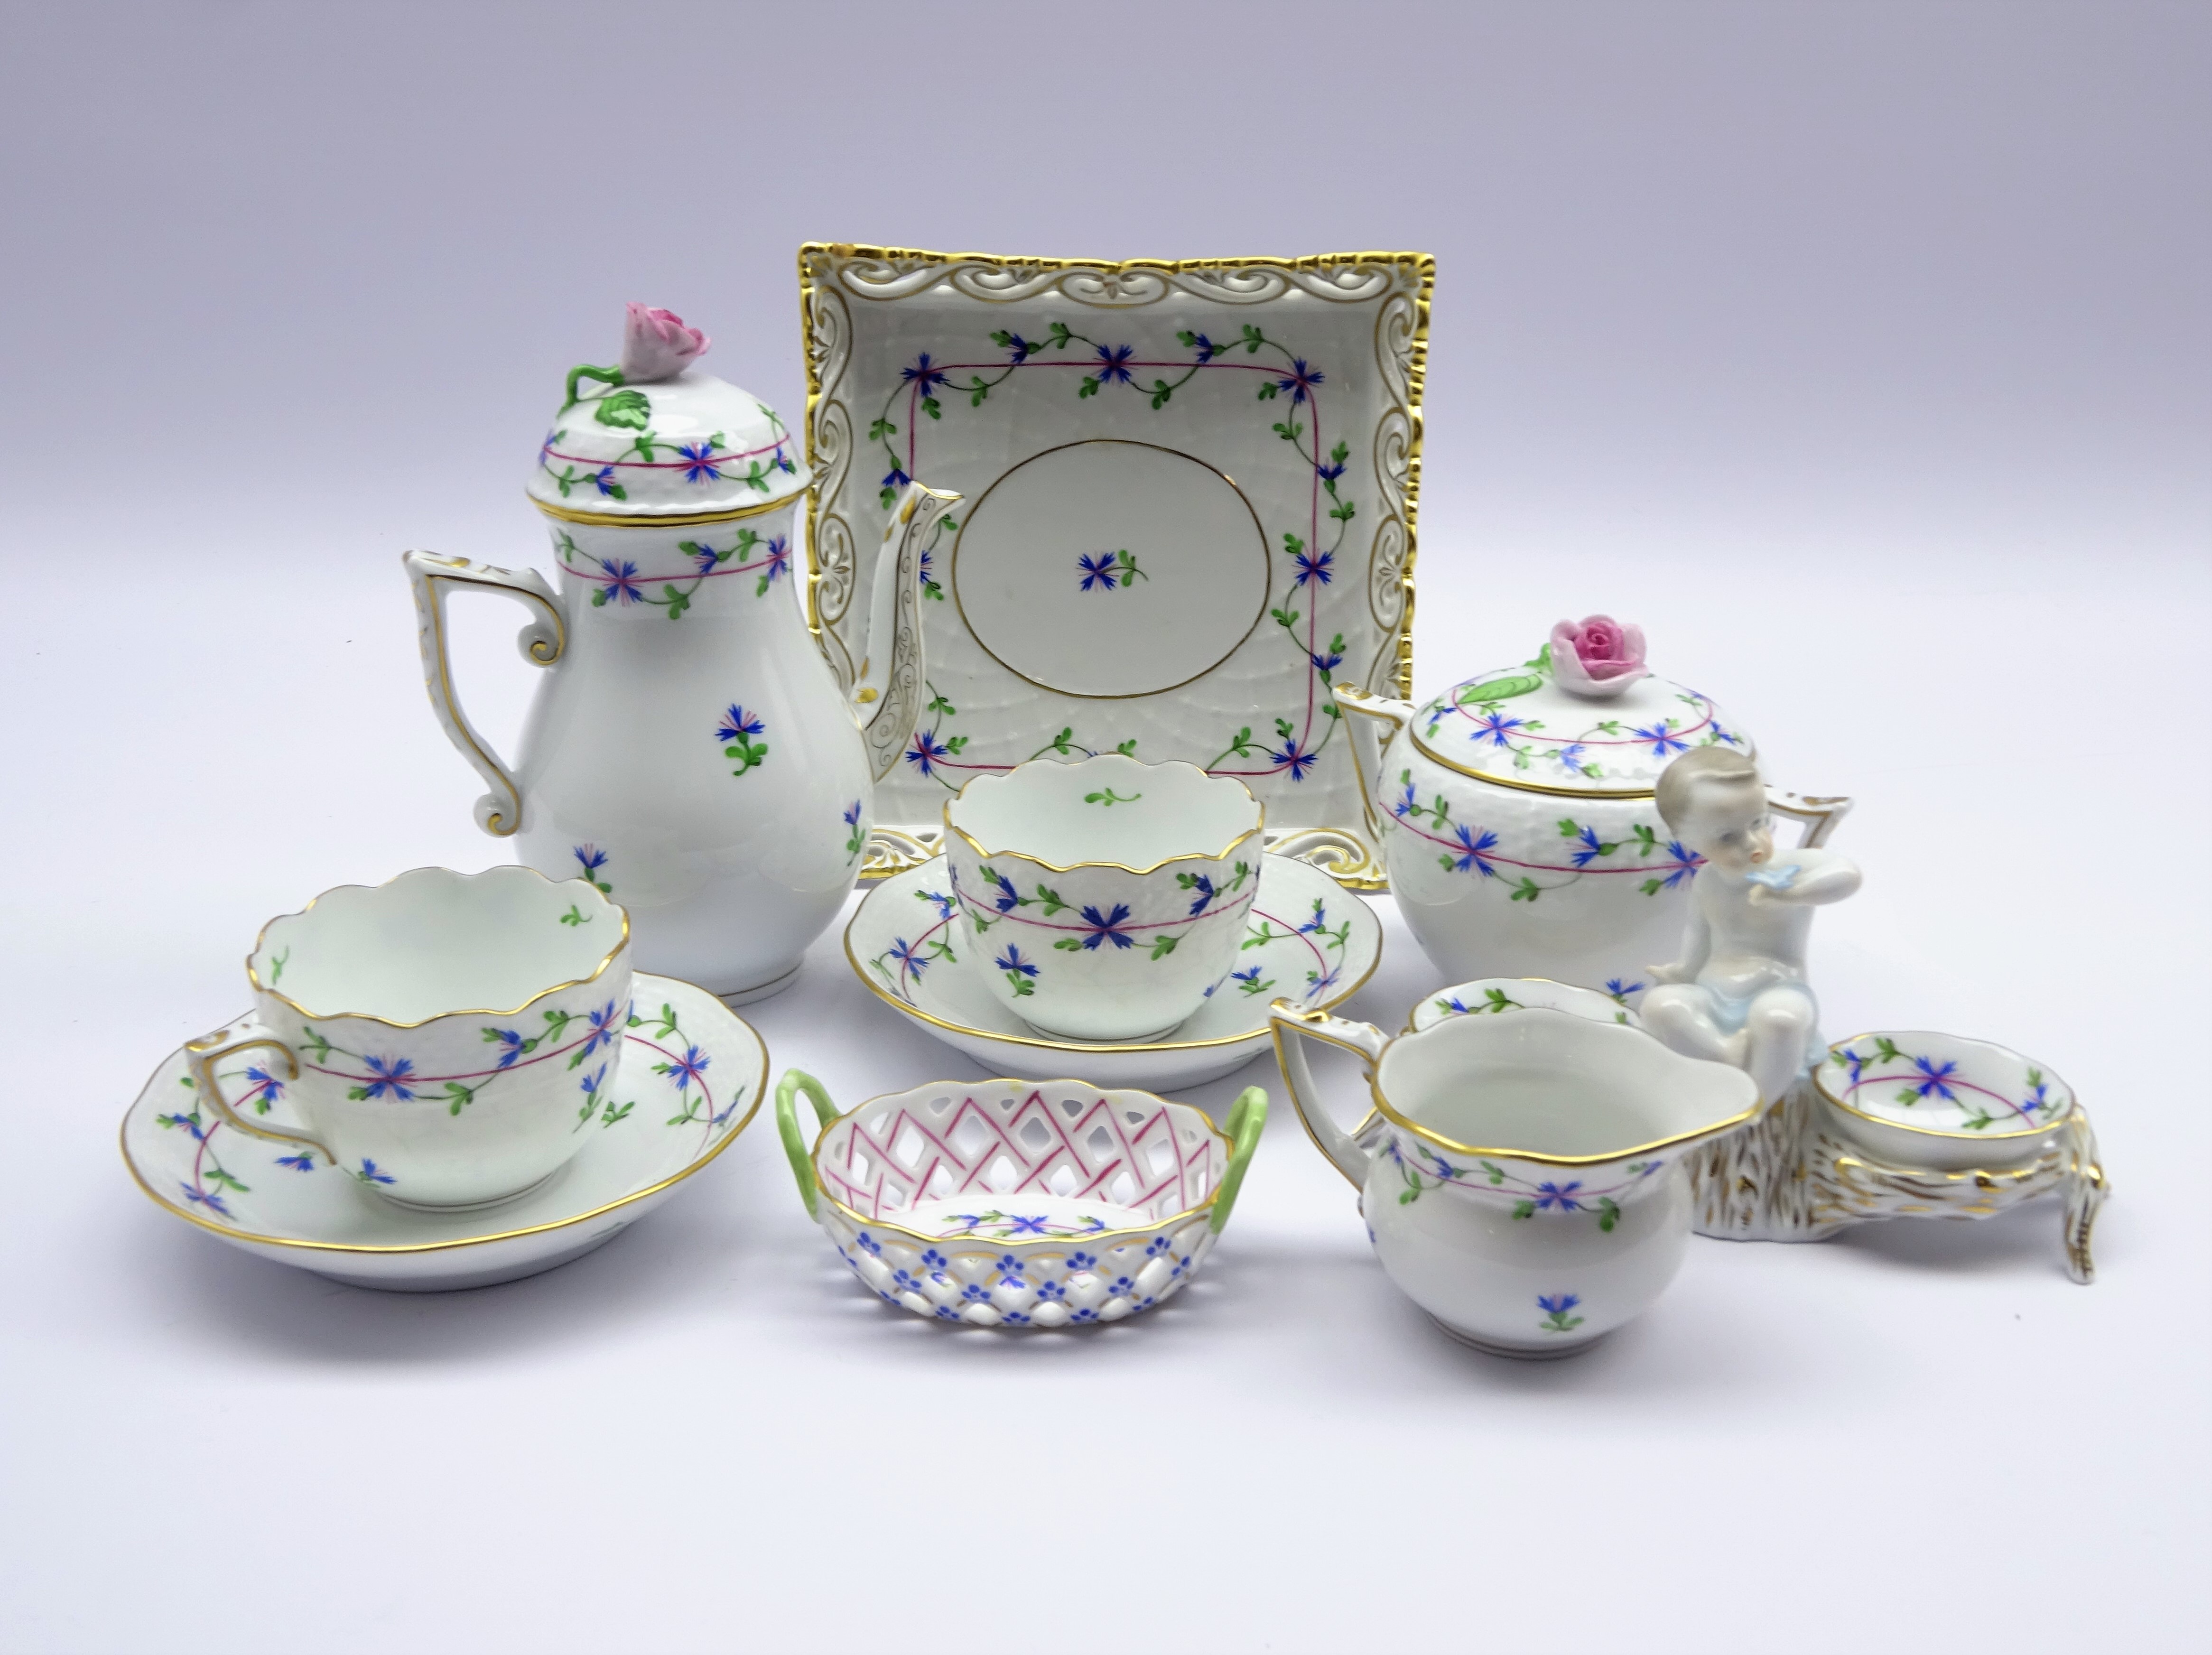 Herend 'Cornflower Garland' coffee ware comprising two cups and saucers, hot water pot, cream jug,